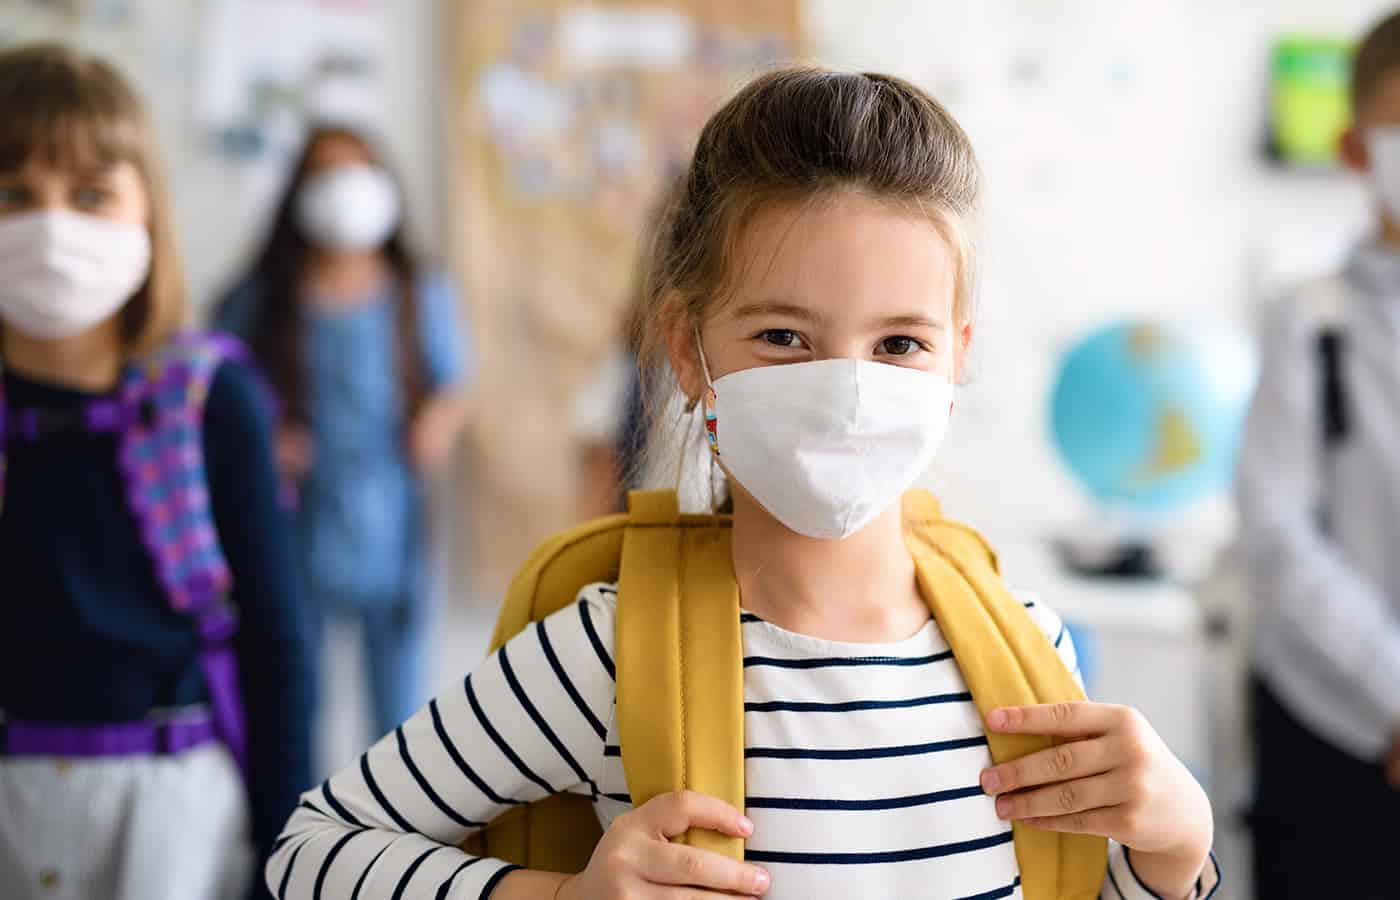 Should The Children Go With Or Without Masks? Pediatricians Vs Policymakers